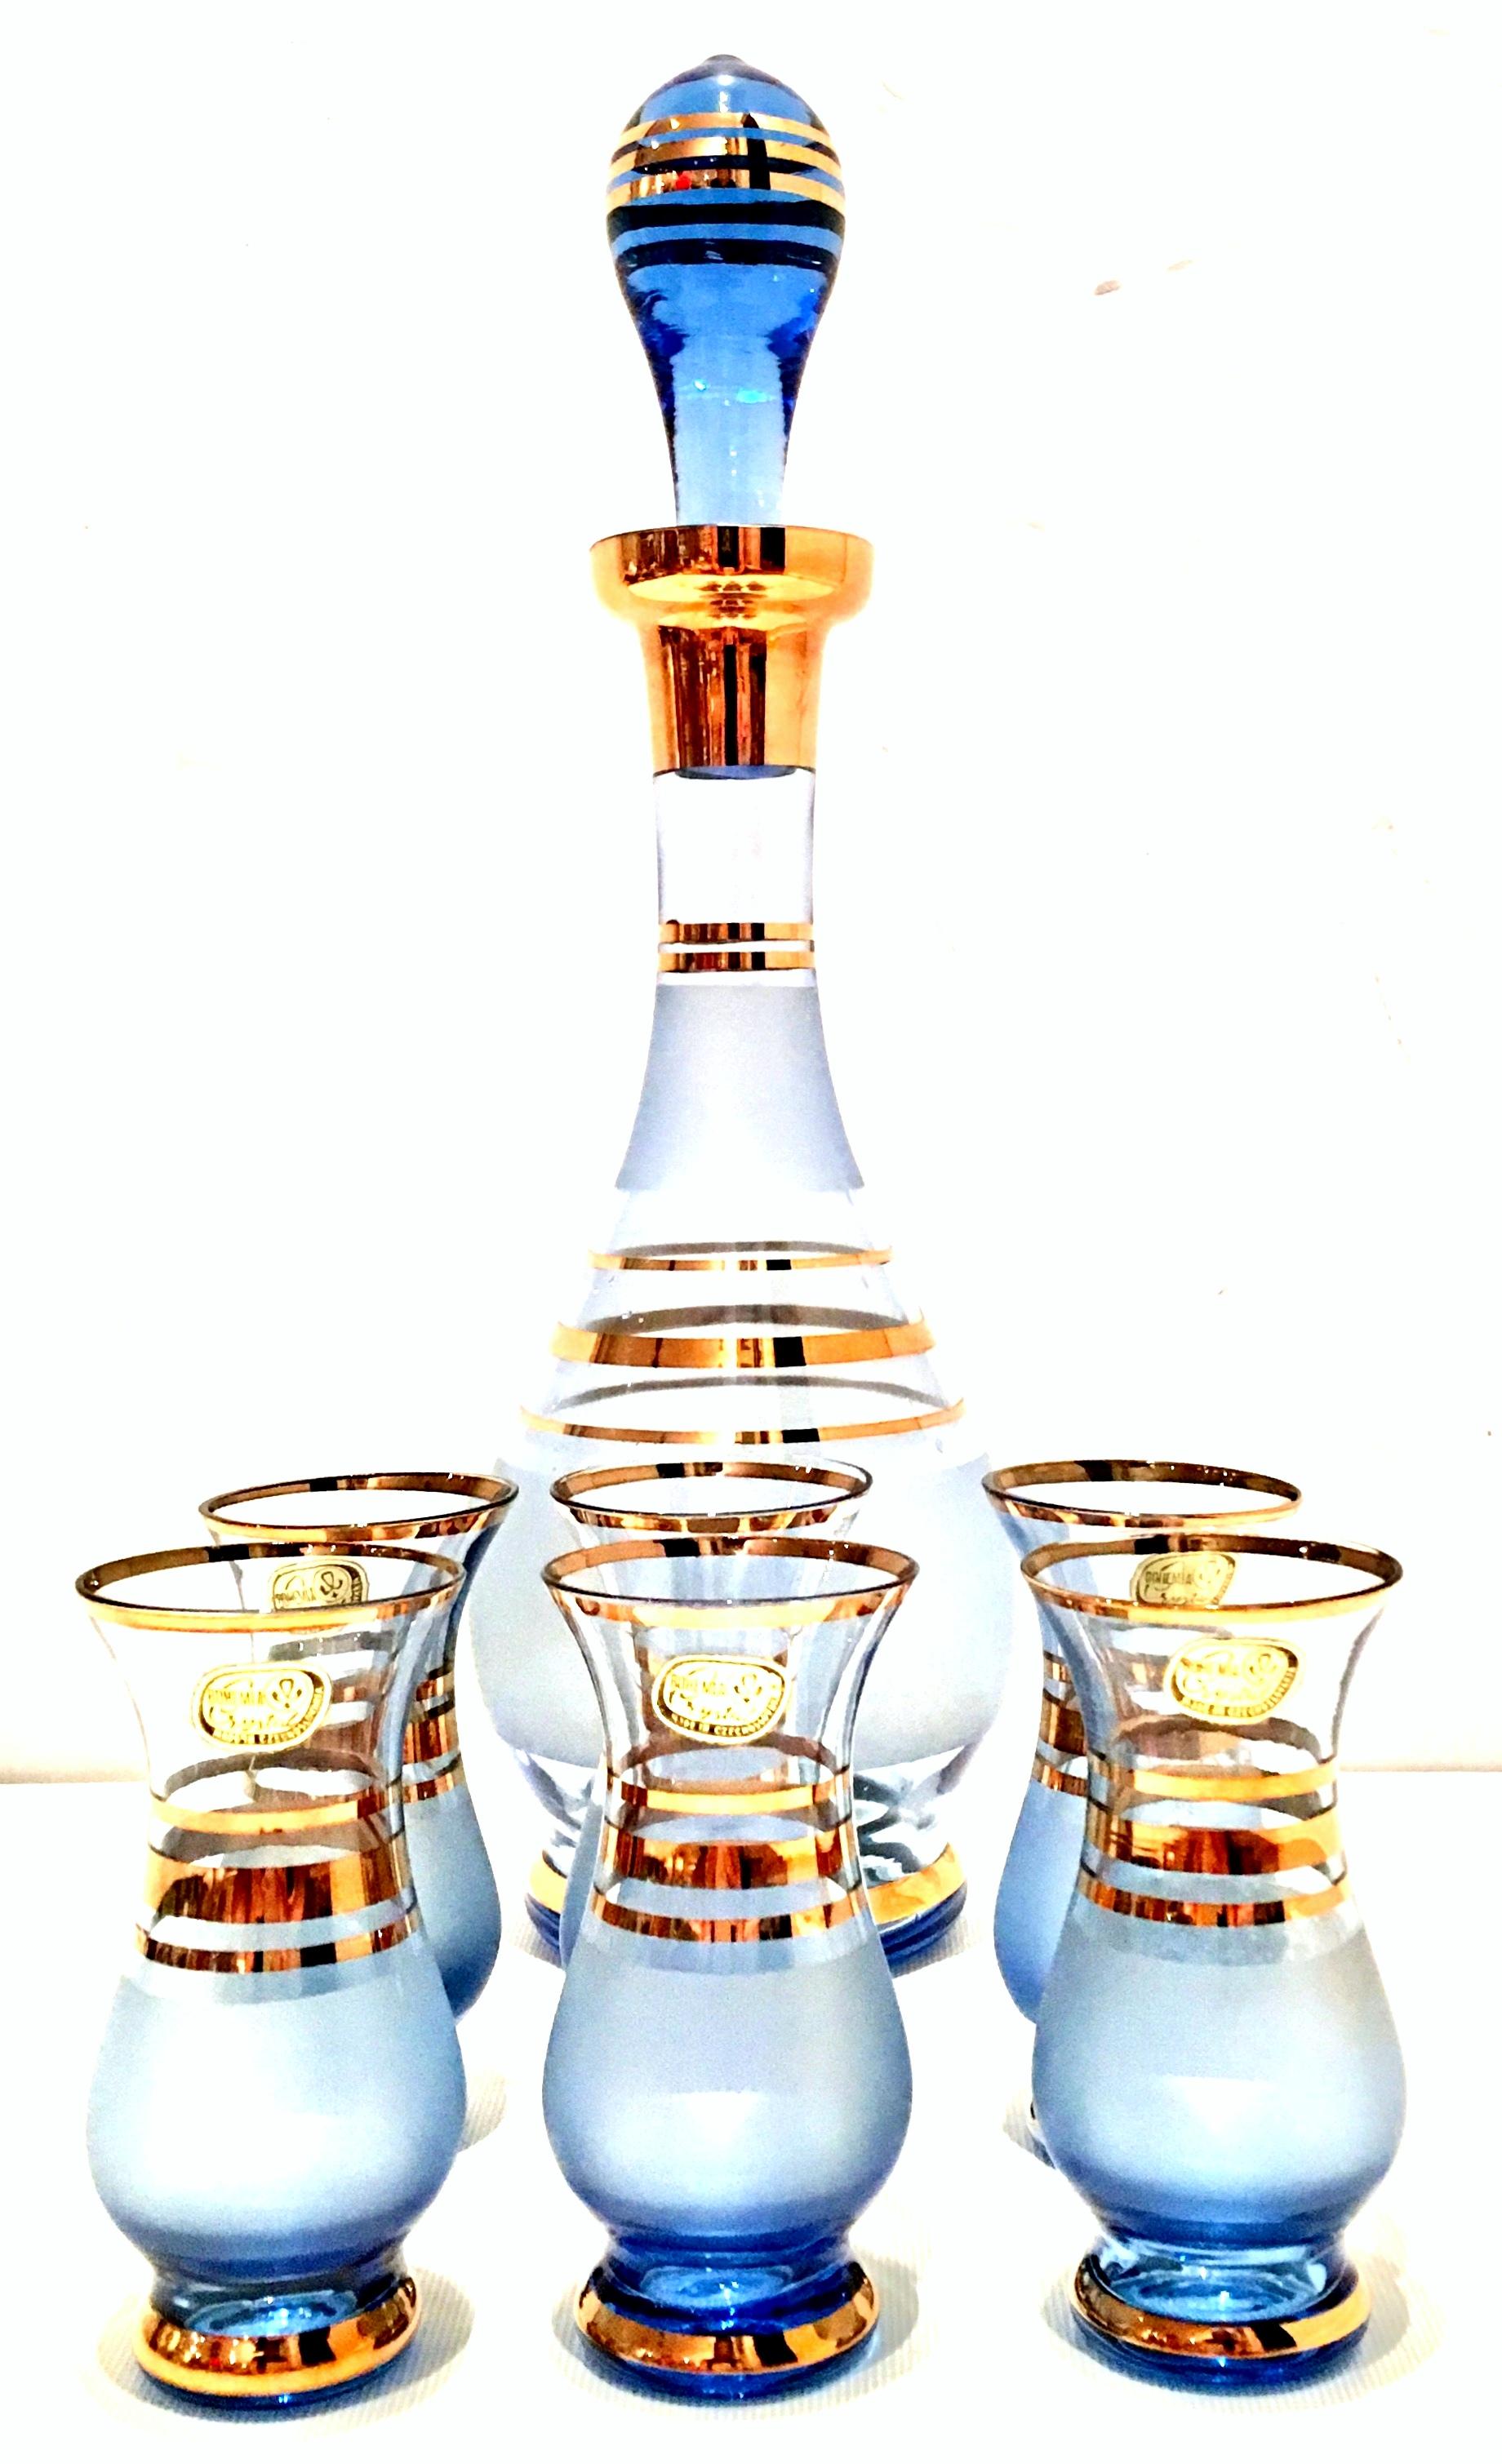 Mid-20th Century crystal Bohemia gilt gold drinks set of seven pieces. This like new blue frosted with 22-karat gold git detail drinks set includes, six cordial cups and one decanter with stopper. Most of the pieces to this set maintain the original